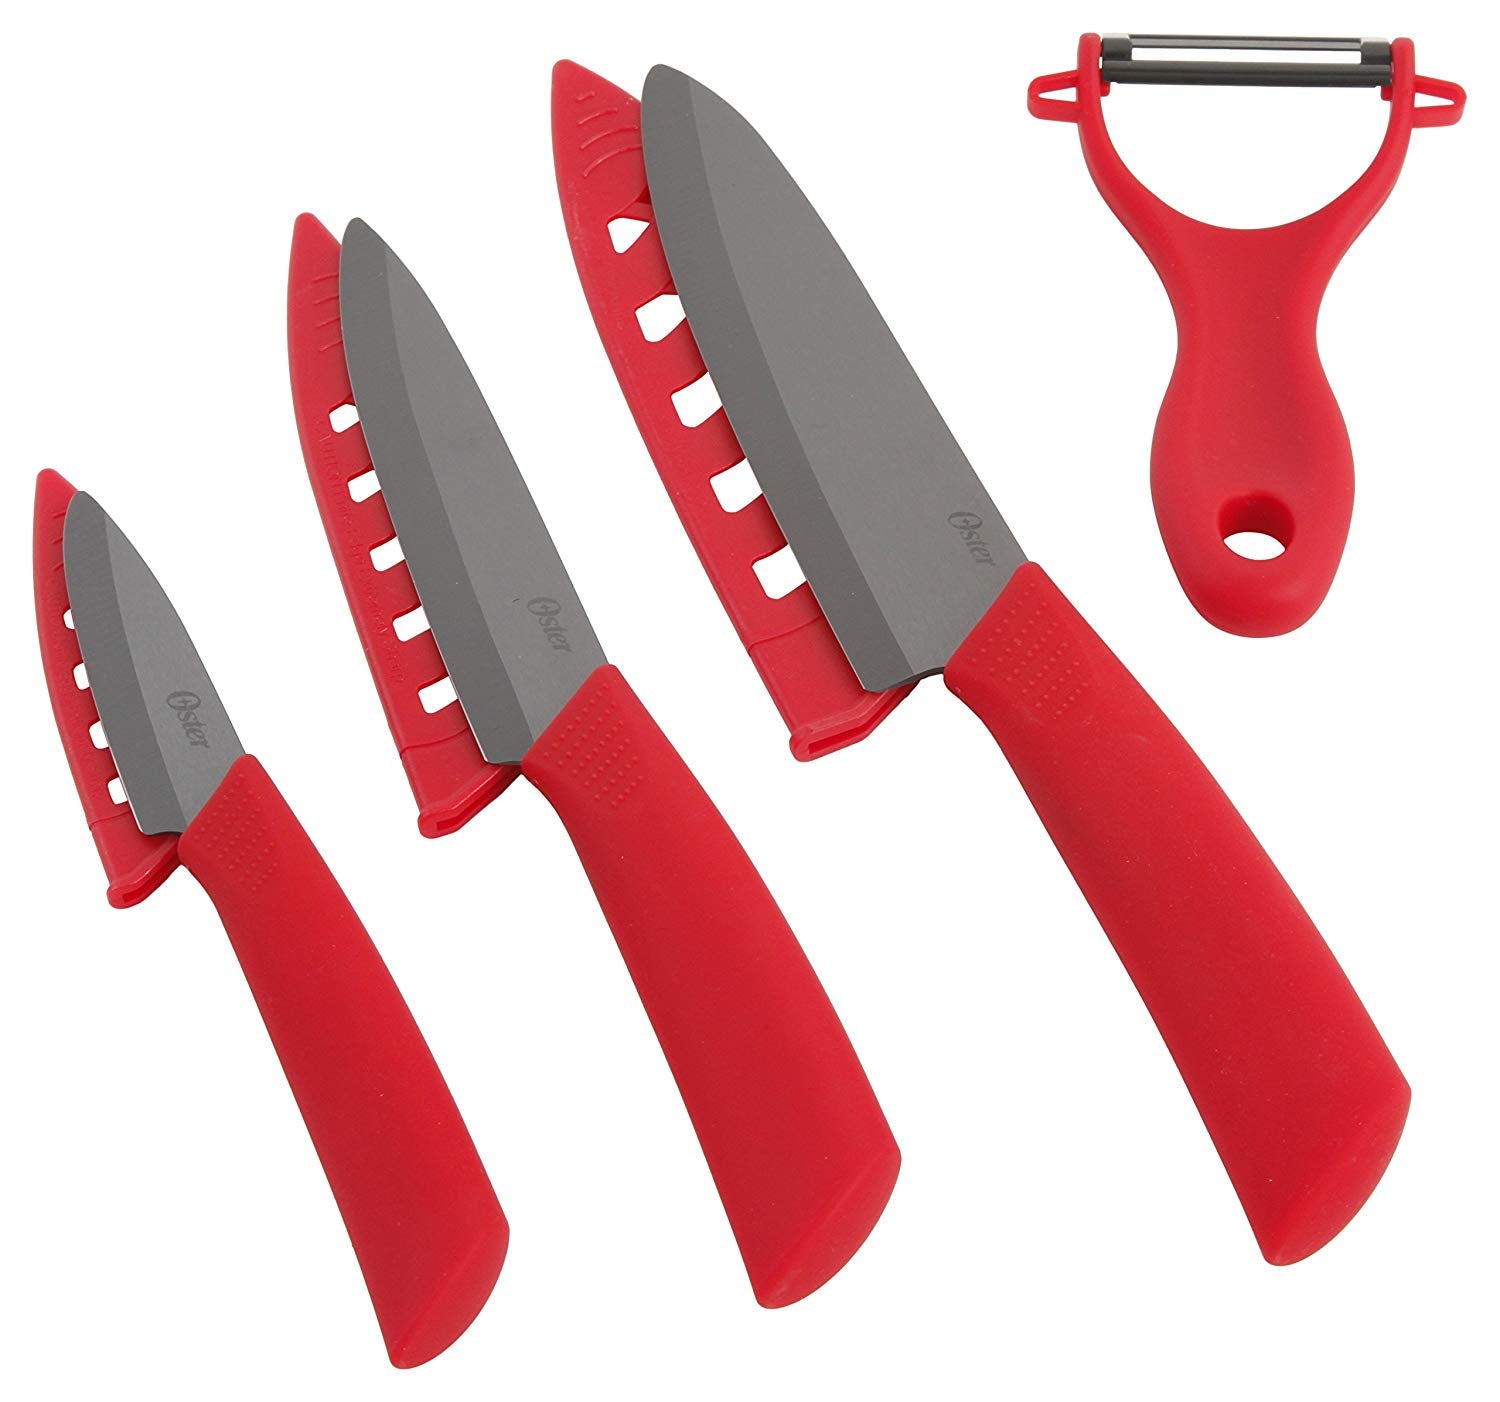 Oster 107312.04 Ostead 4 Piece Ceramic Blade with Sheath Cutlery Set, Metallic Red/Black